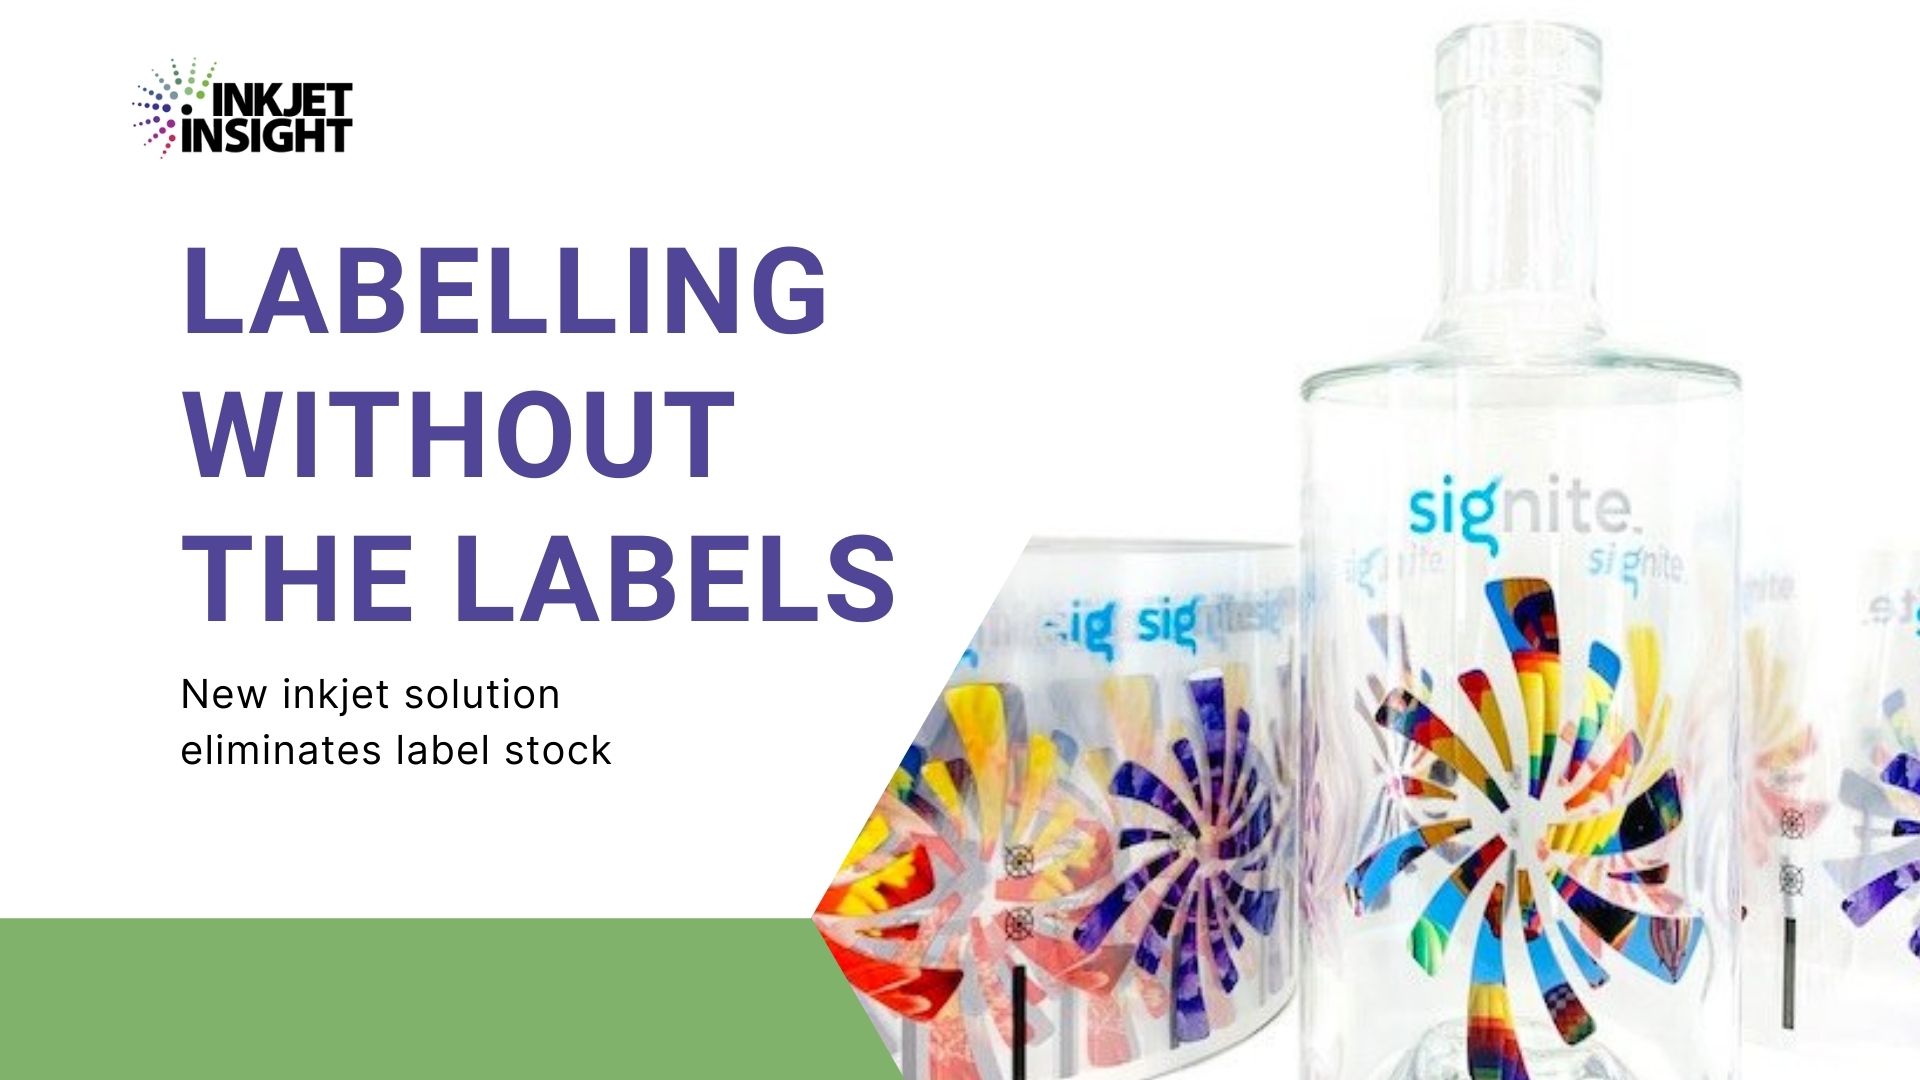 Featured image for “Labelling Without the Labels”